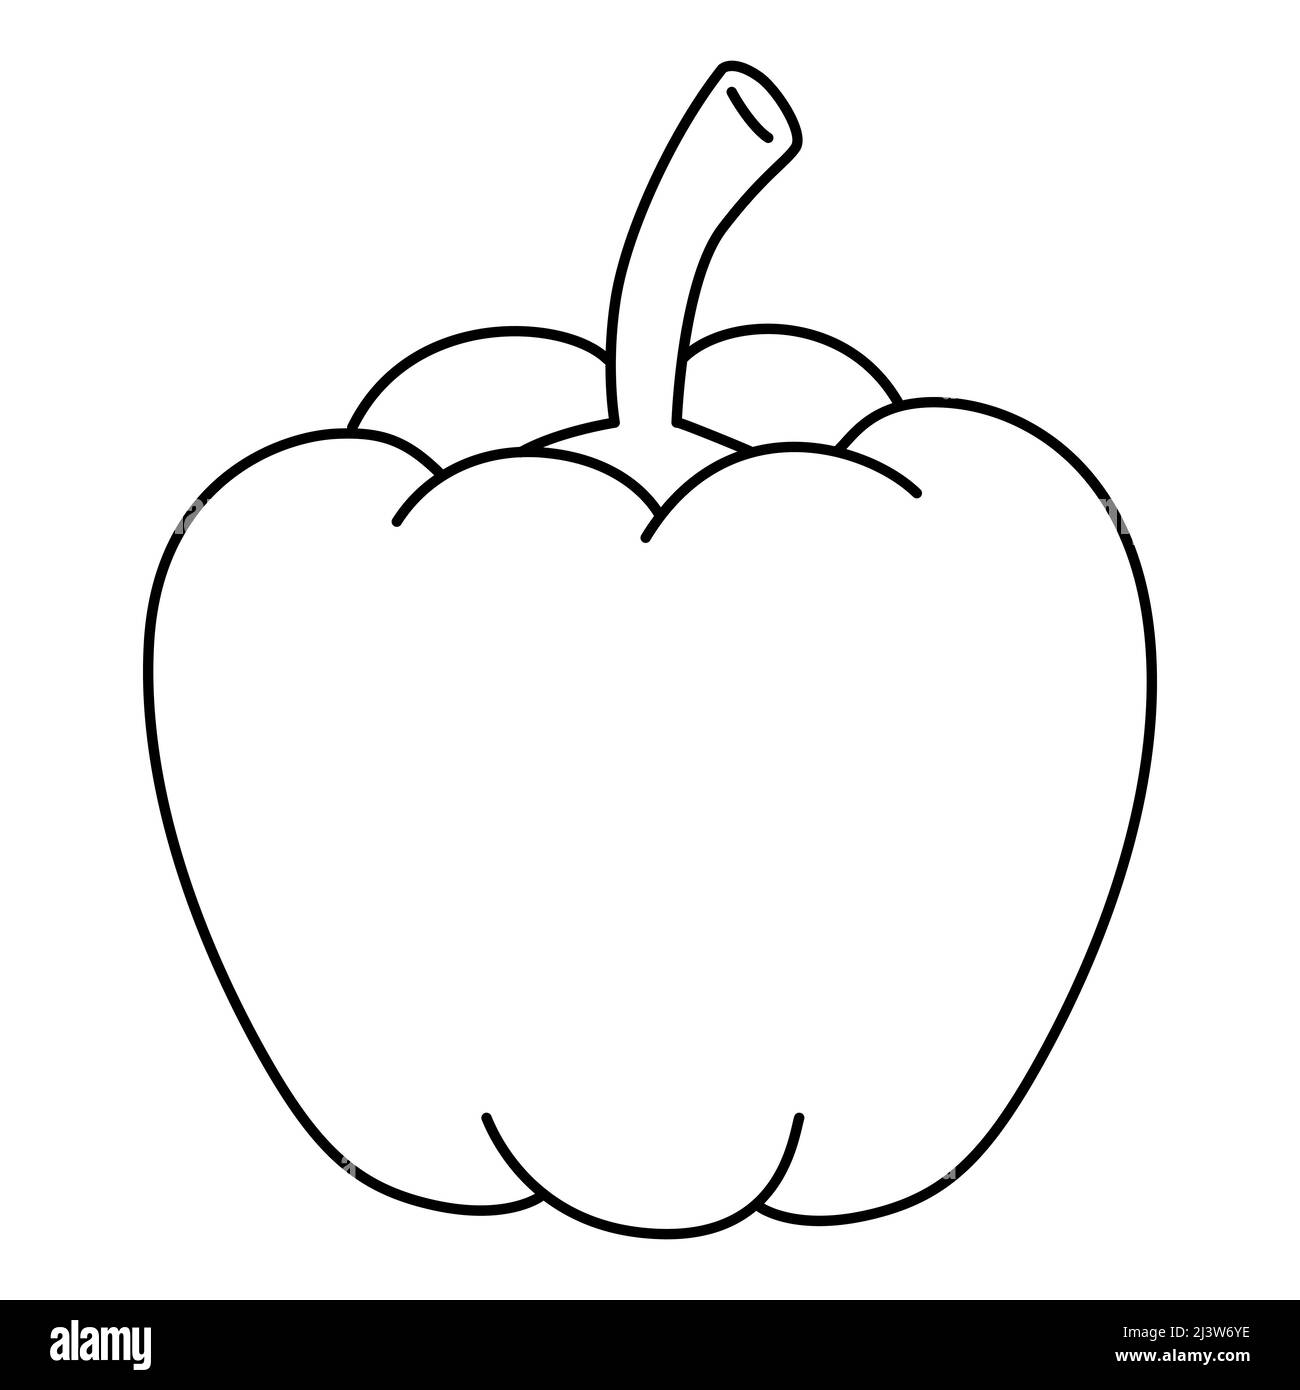 Black and white cartoon vector illustration of bell pepper for coloring book. Ripe fresh vegetable for cooking, source of vitamins Stock Vector